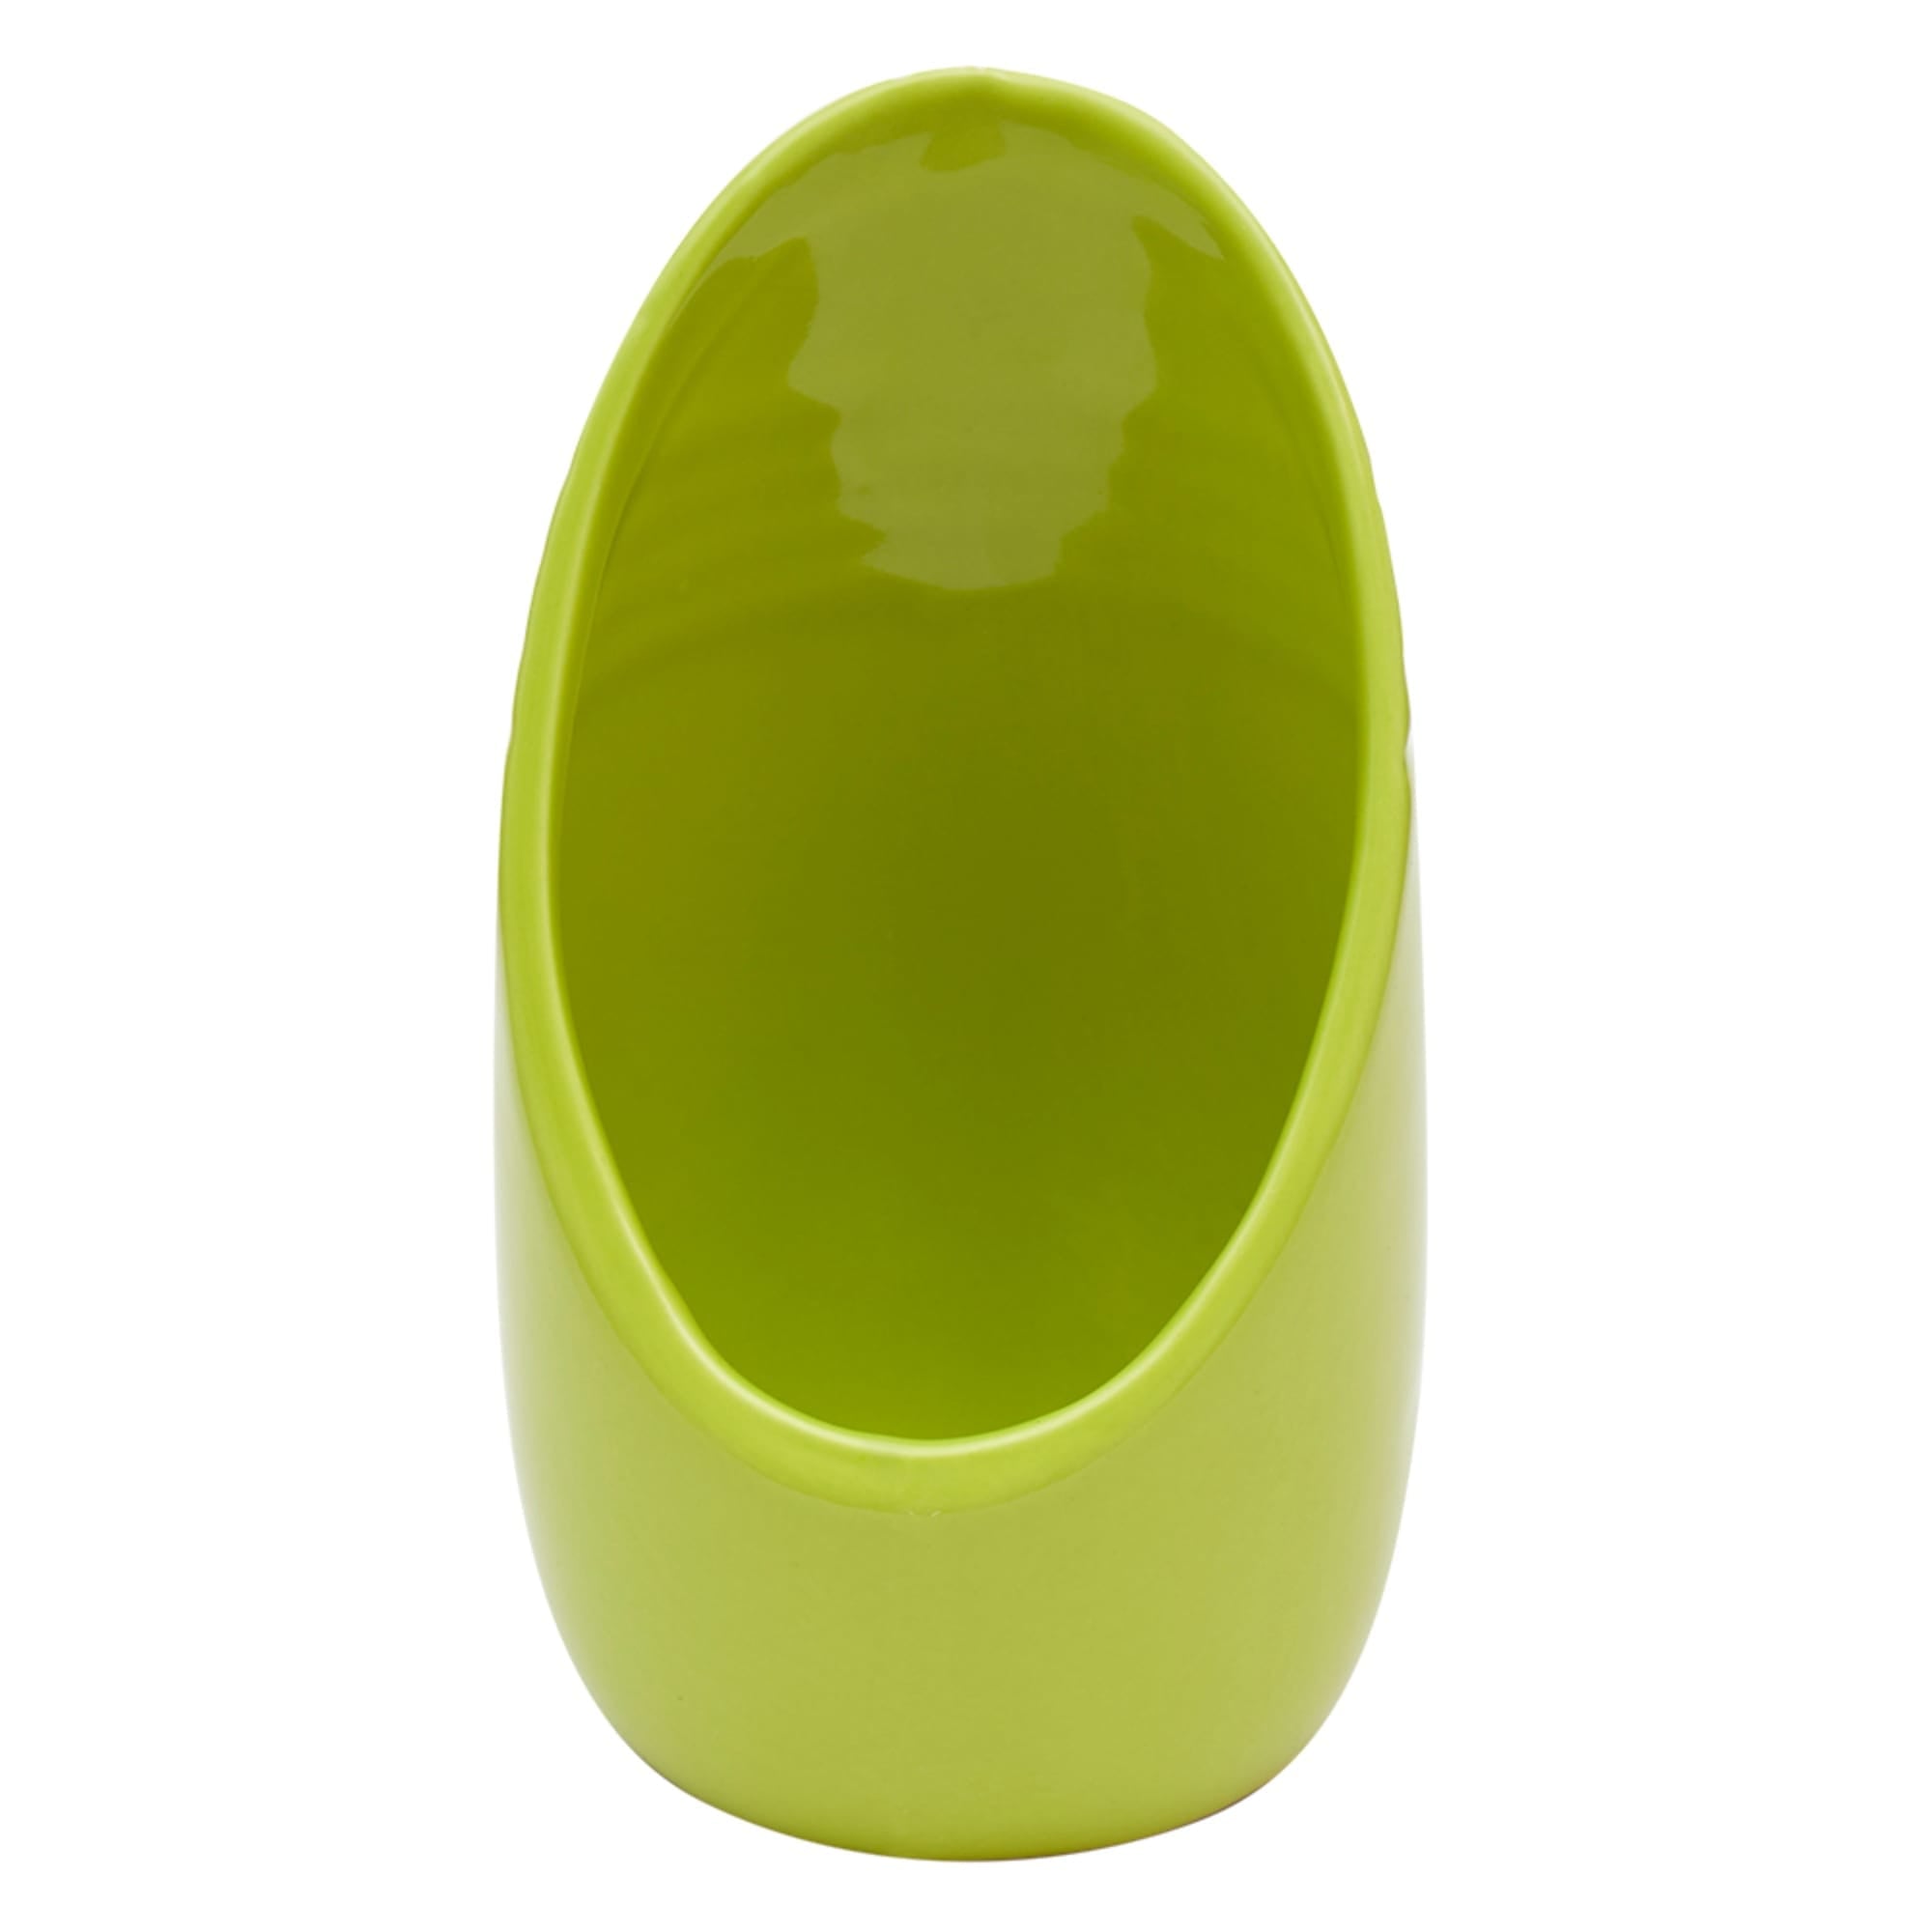 Home Basics Stand Up Ceramic Spoon Rest, Lime Green $4.00 EACH, CASE PACK OF 12